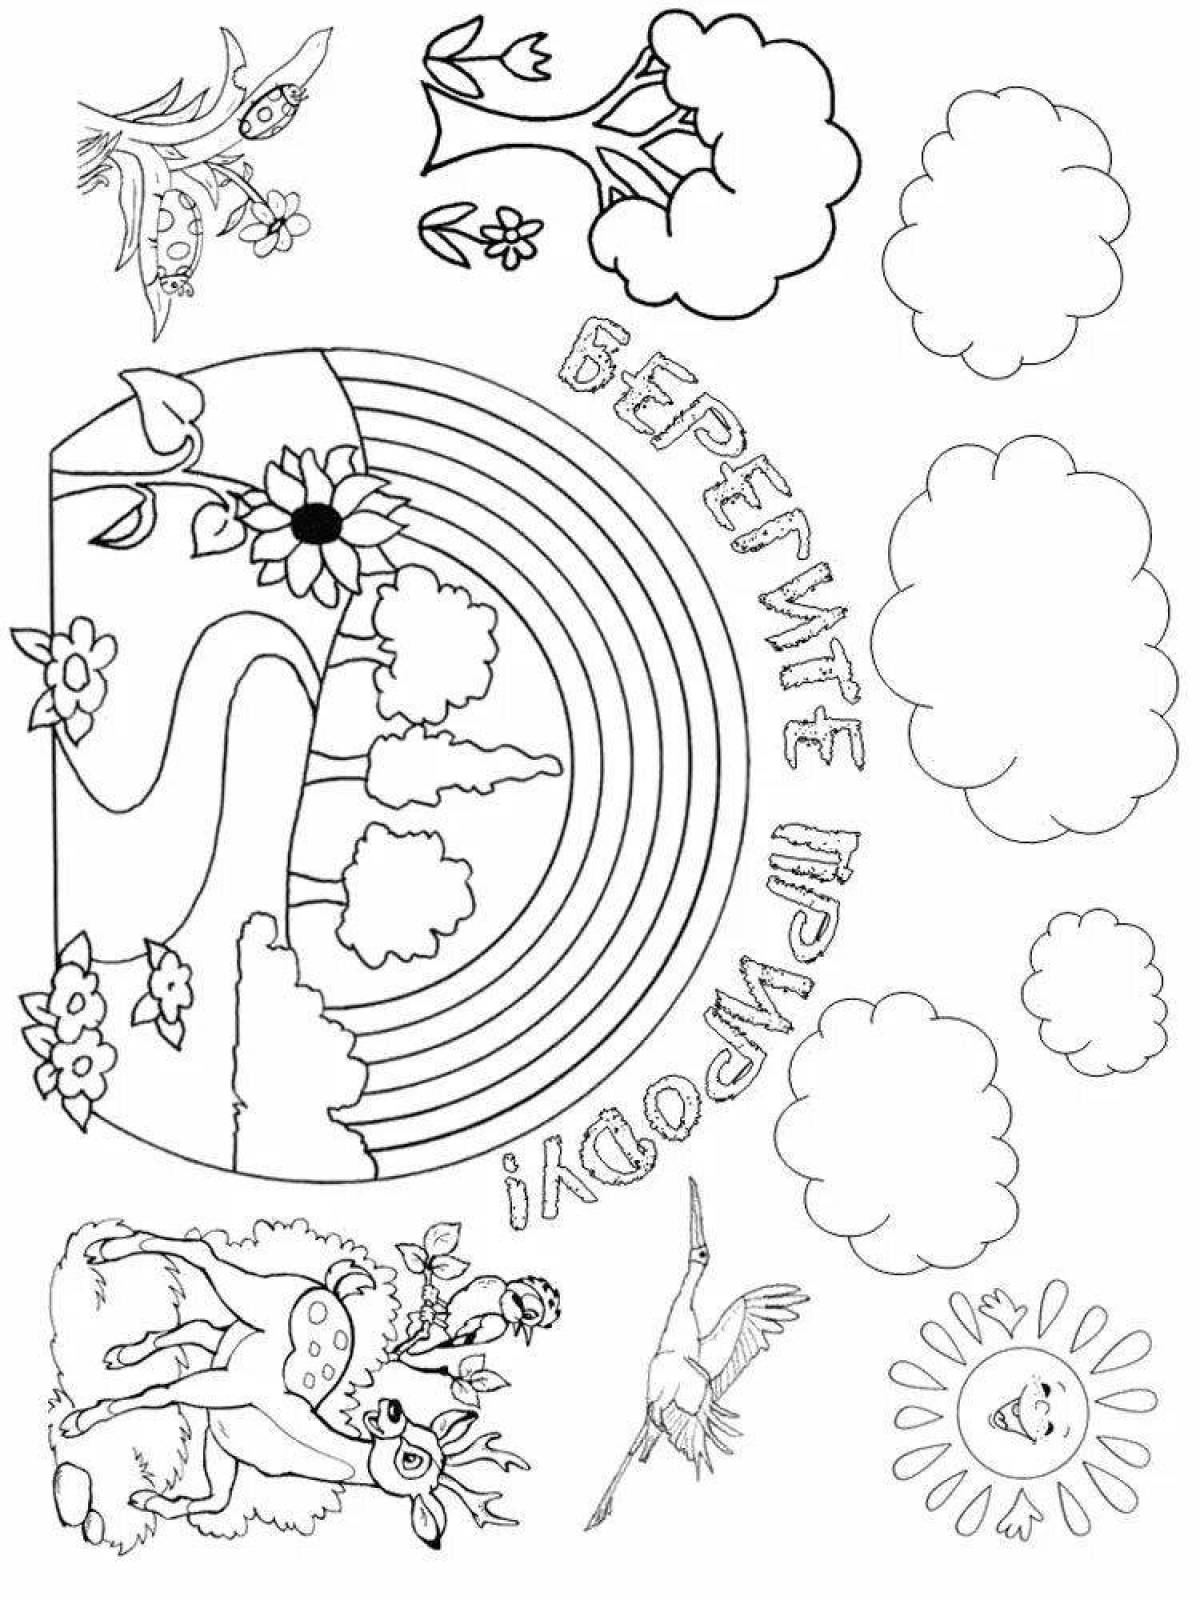 Coloring page glorious protection of nature